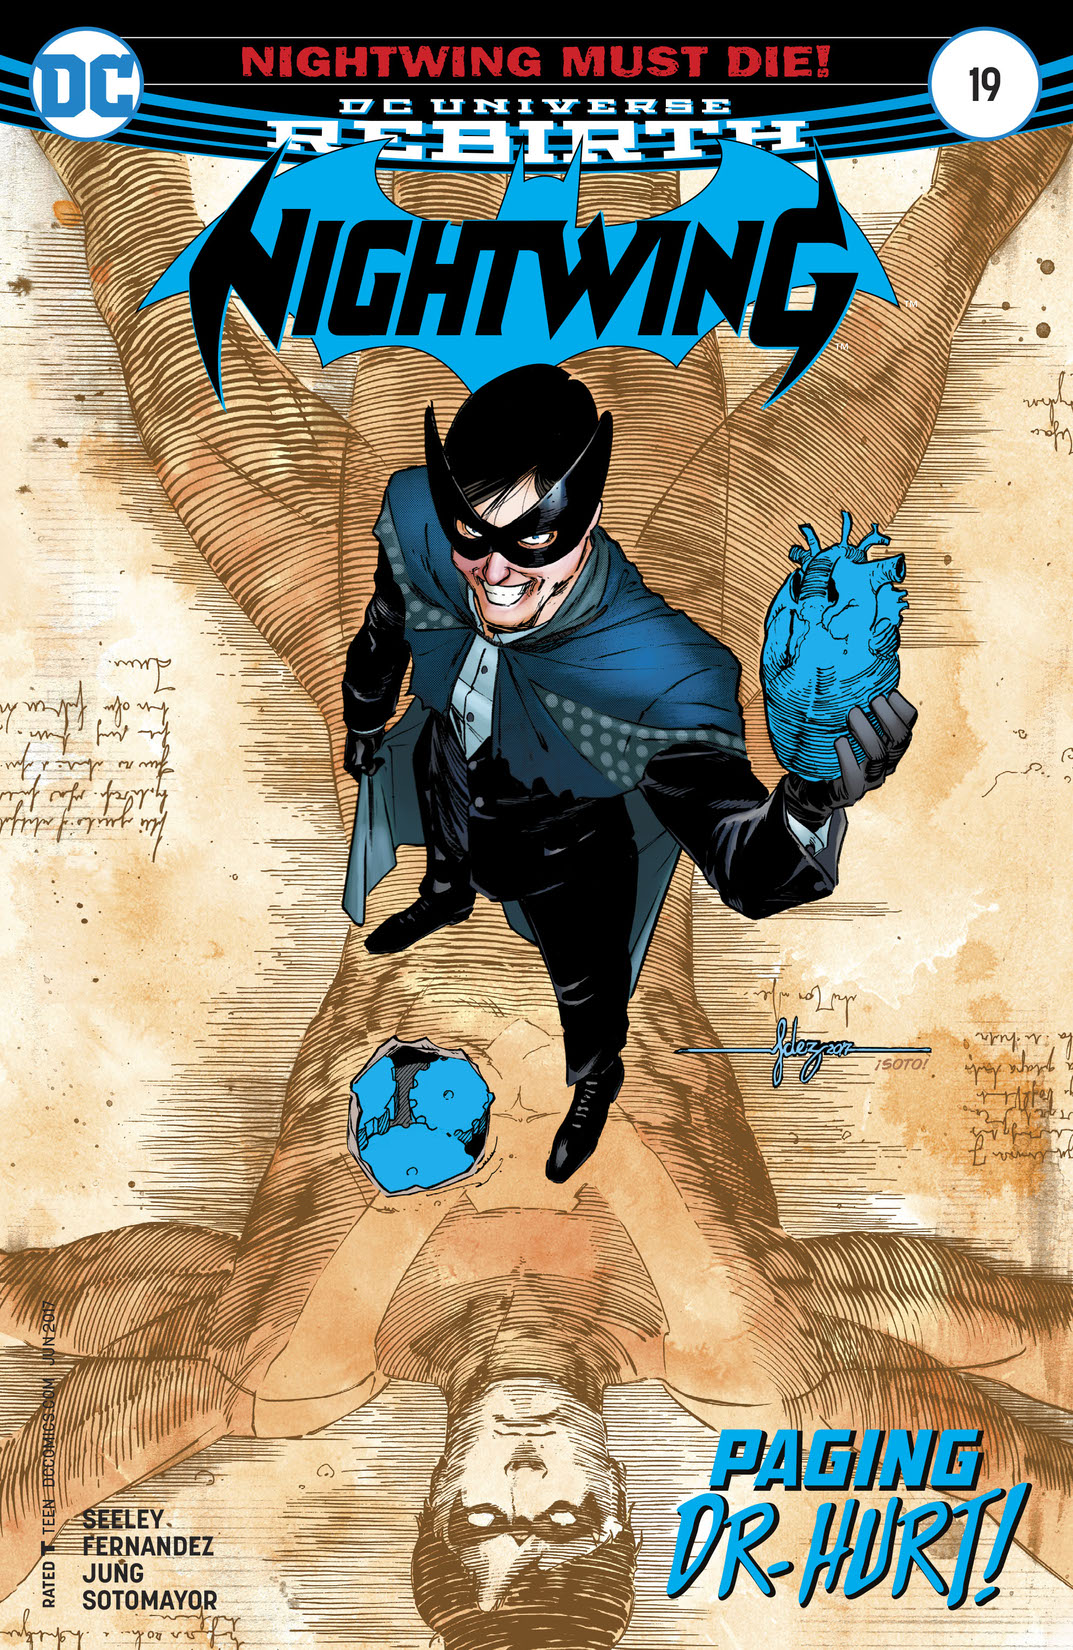 Nightwing (2016-) #19 preview images